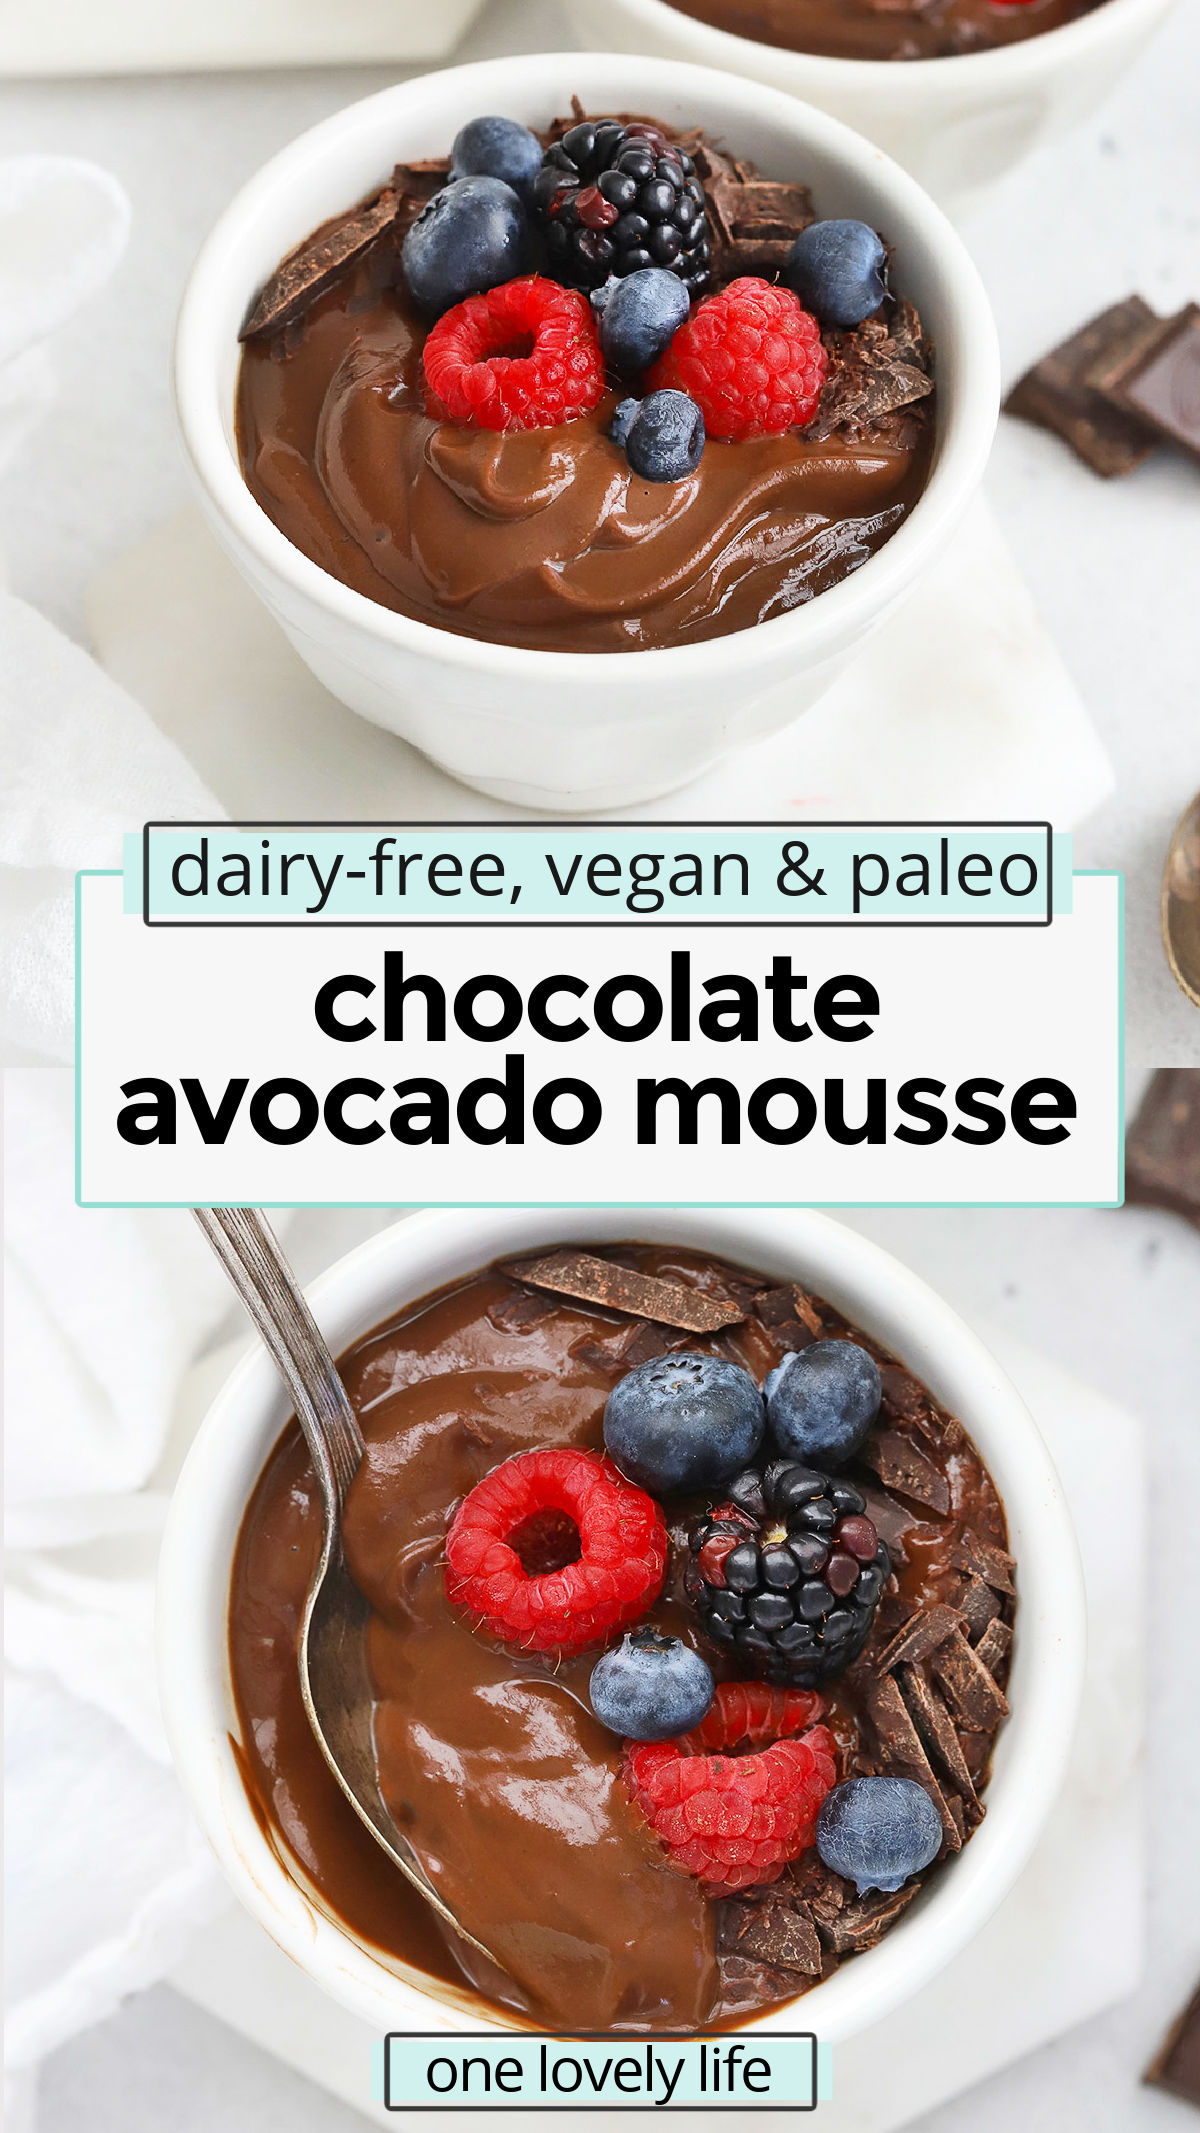 Chocolate Avocado Mousse - This velvety vegan chocolate mousse recipe has all the gorgeous flavor you're looking for and an ingredient list you're going to love! (Paleo, dairy-free). // paleo chocolate mousse // healthy chocolate mousse // dairy-free chocolate mousse // Avocado Chocolate pudding // Healthy dessert // chocolate avocado pudding // healthy pudding // healthy mousse recipe // healthy dessert // valentine's day dessert // no bake dessert recipe